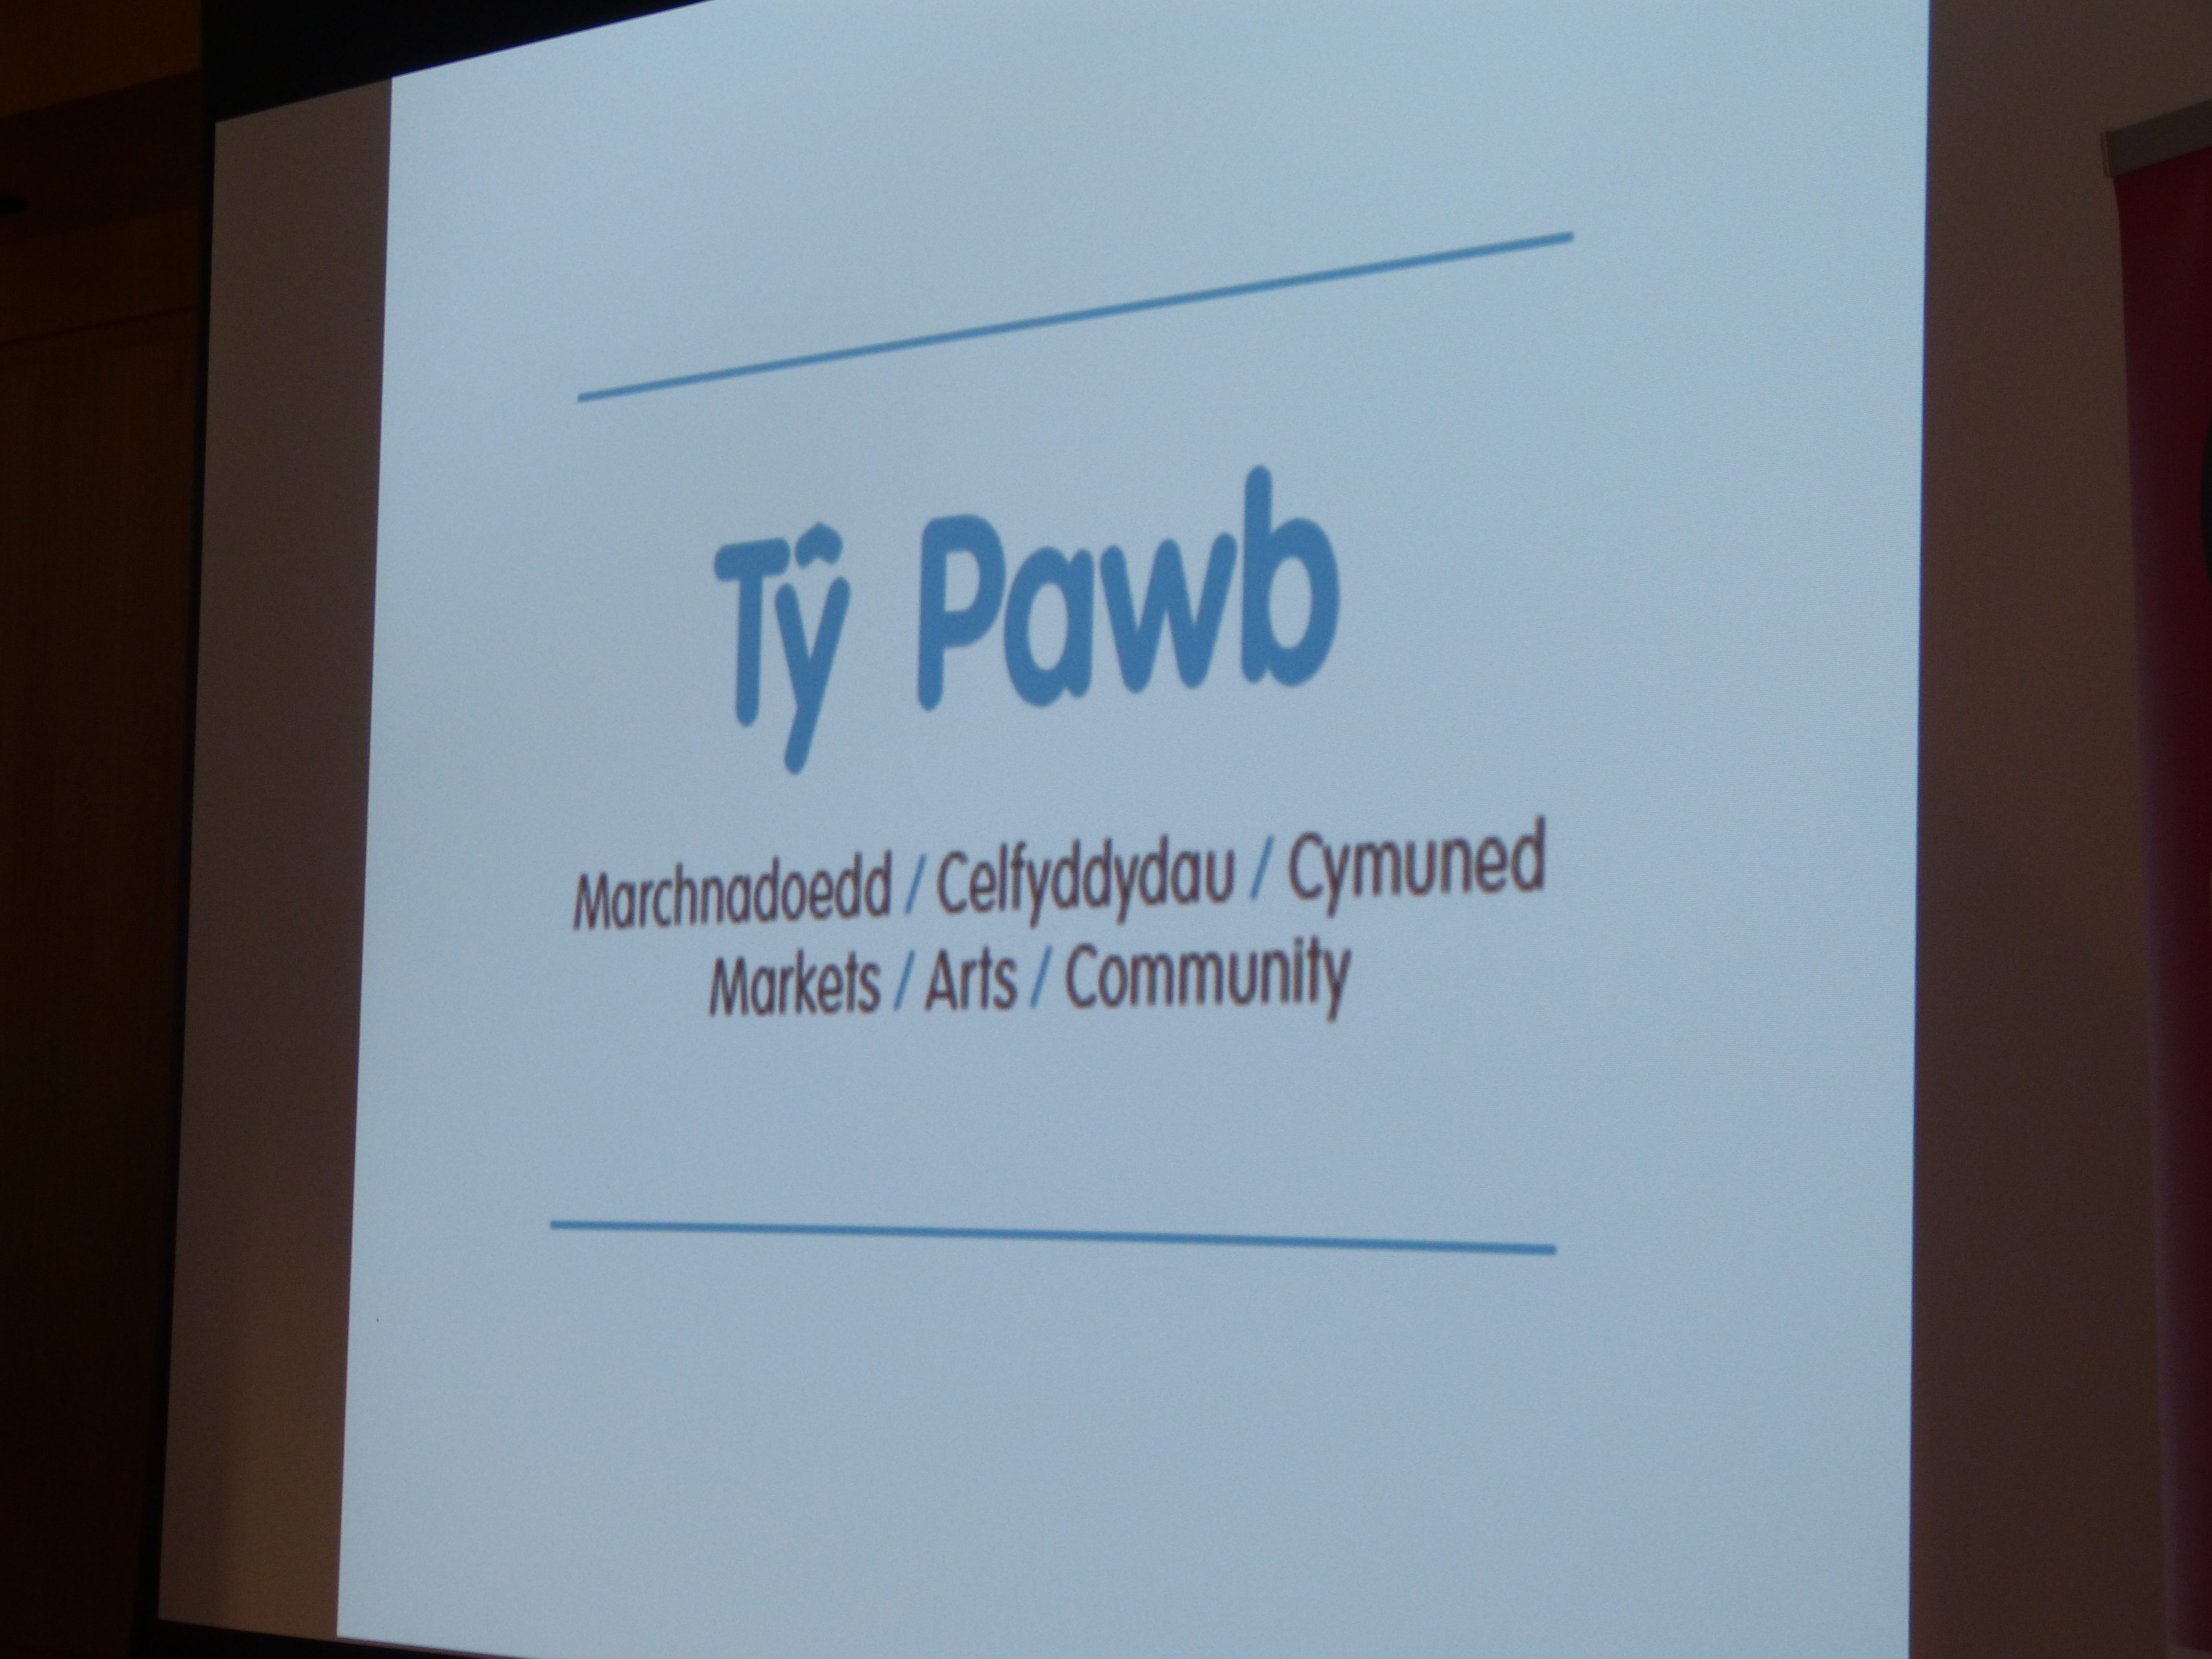 Tŷ Pawb revealed as name for new arts and markets facility